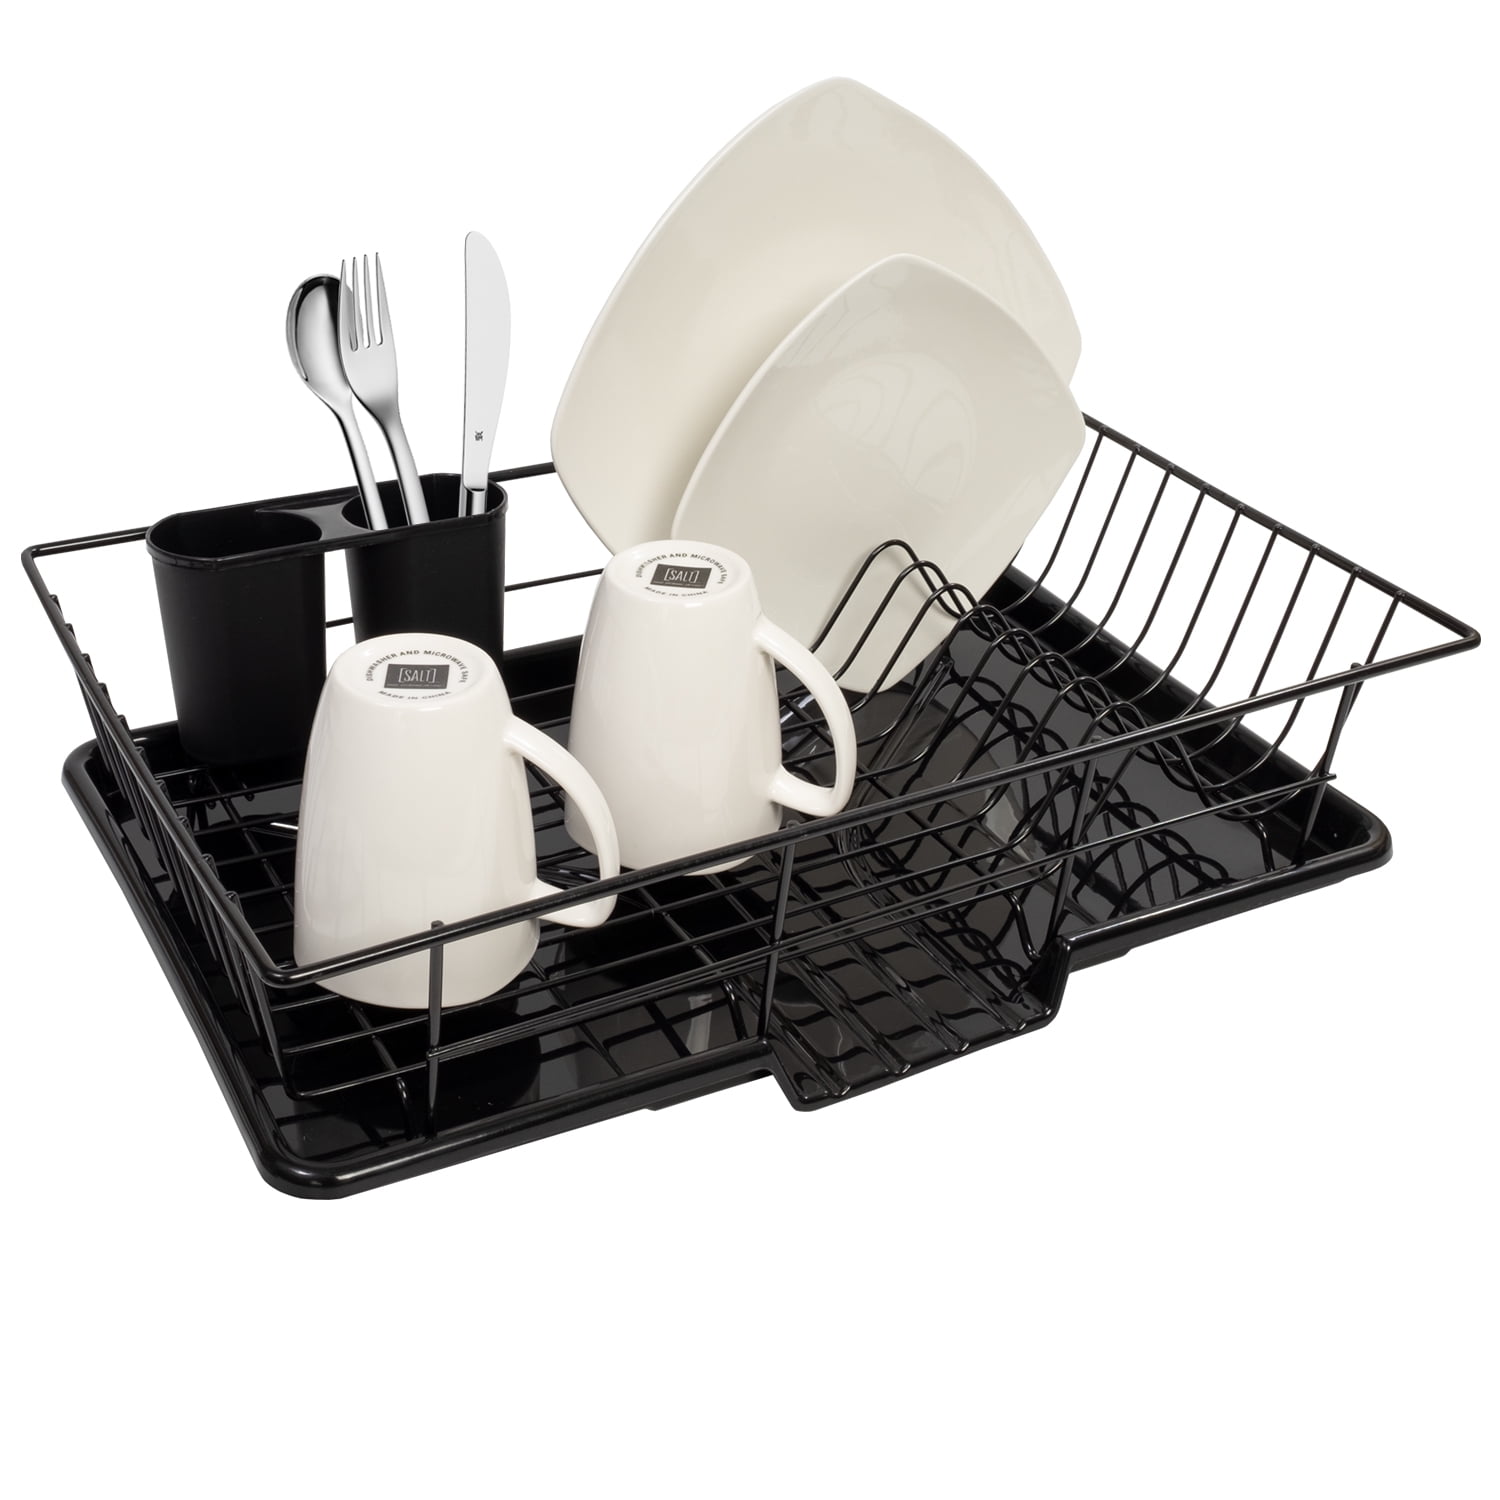 OITREX 3 in 1 Combo Offer Large Sink Set Dish Rack Drainer with Tray for  Kitchen